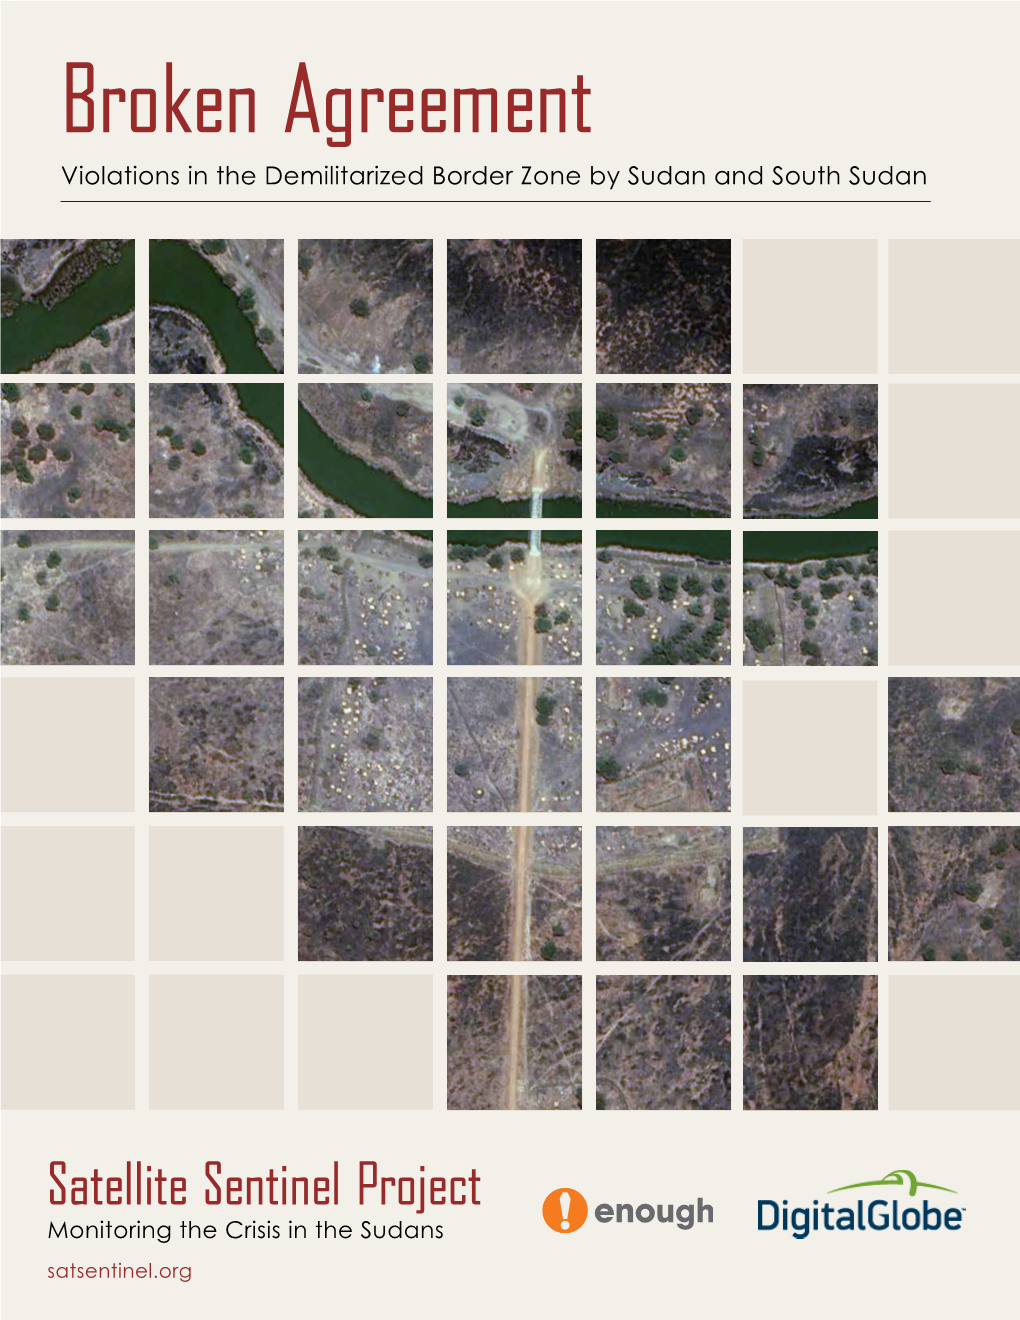 Broken Agreement Violations in the Demilitarized Border Zone by Sudan and South Sudan